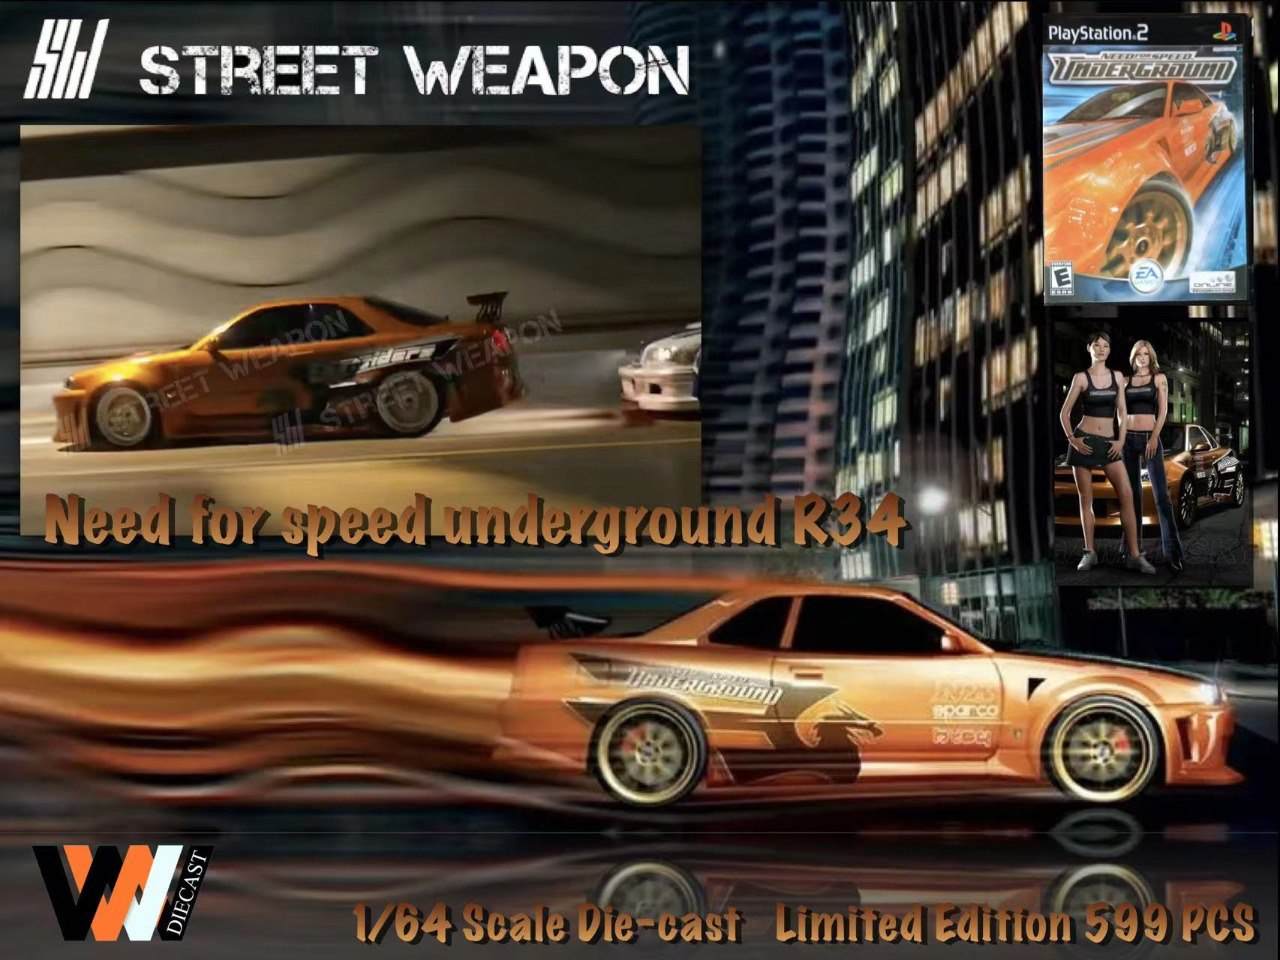 Street Weapon 1:64 Nissan Skyline R34 Need For Speed Underground Limited 599pcs